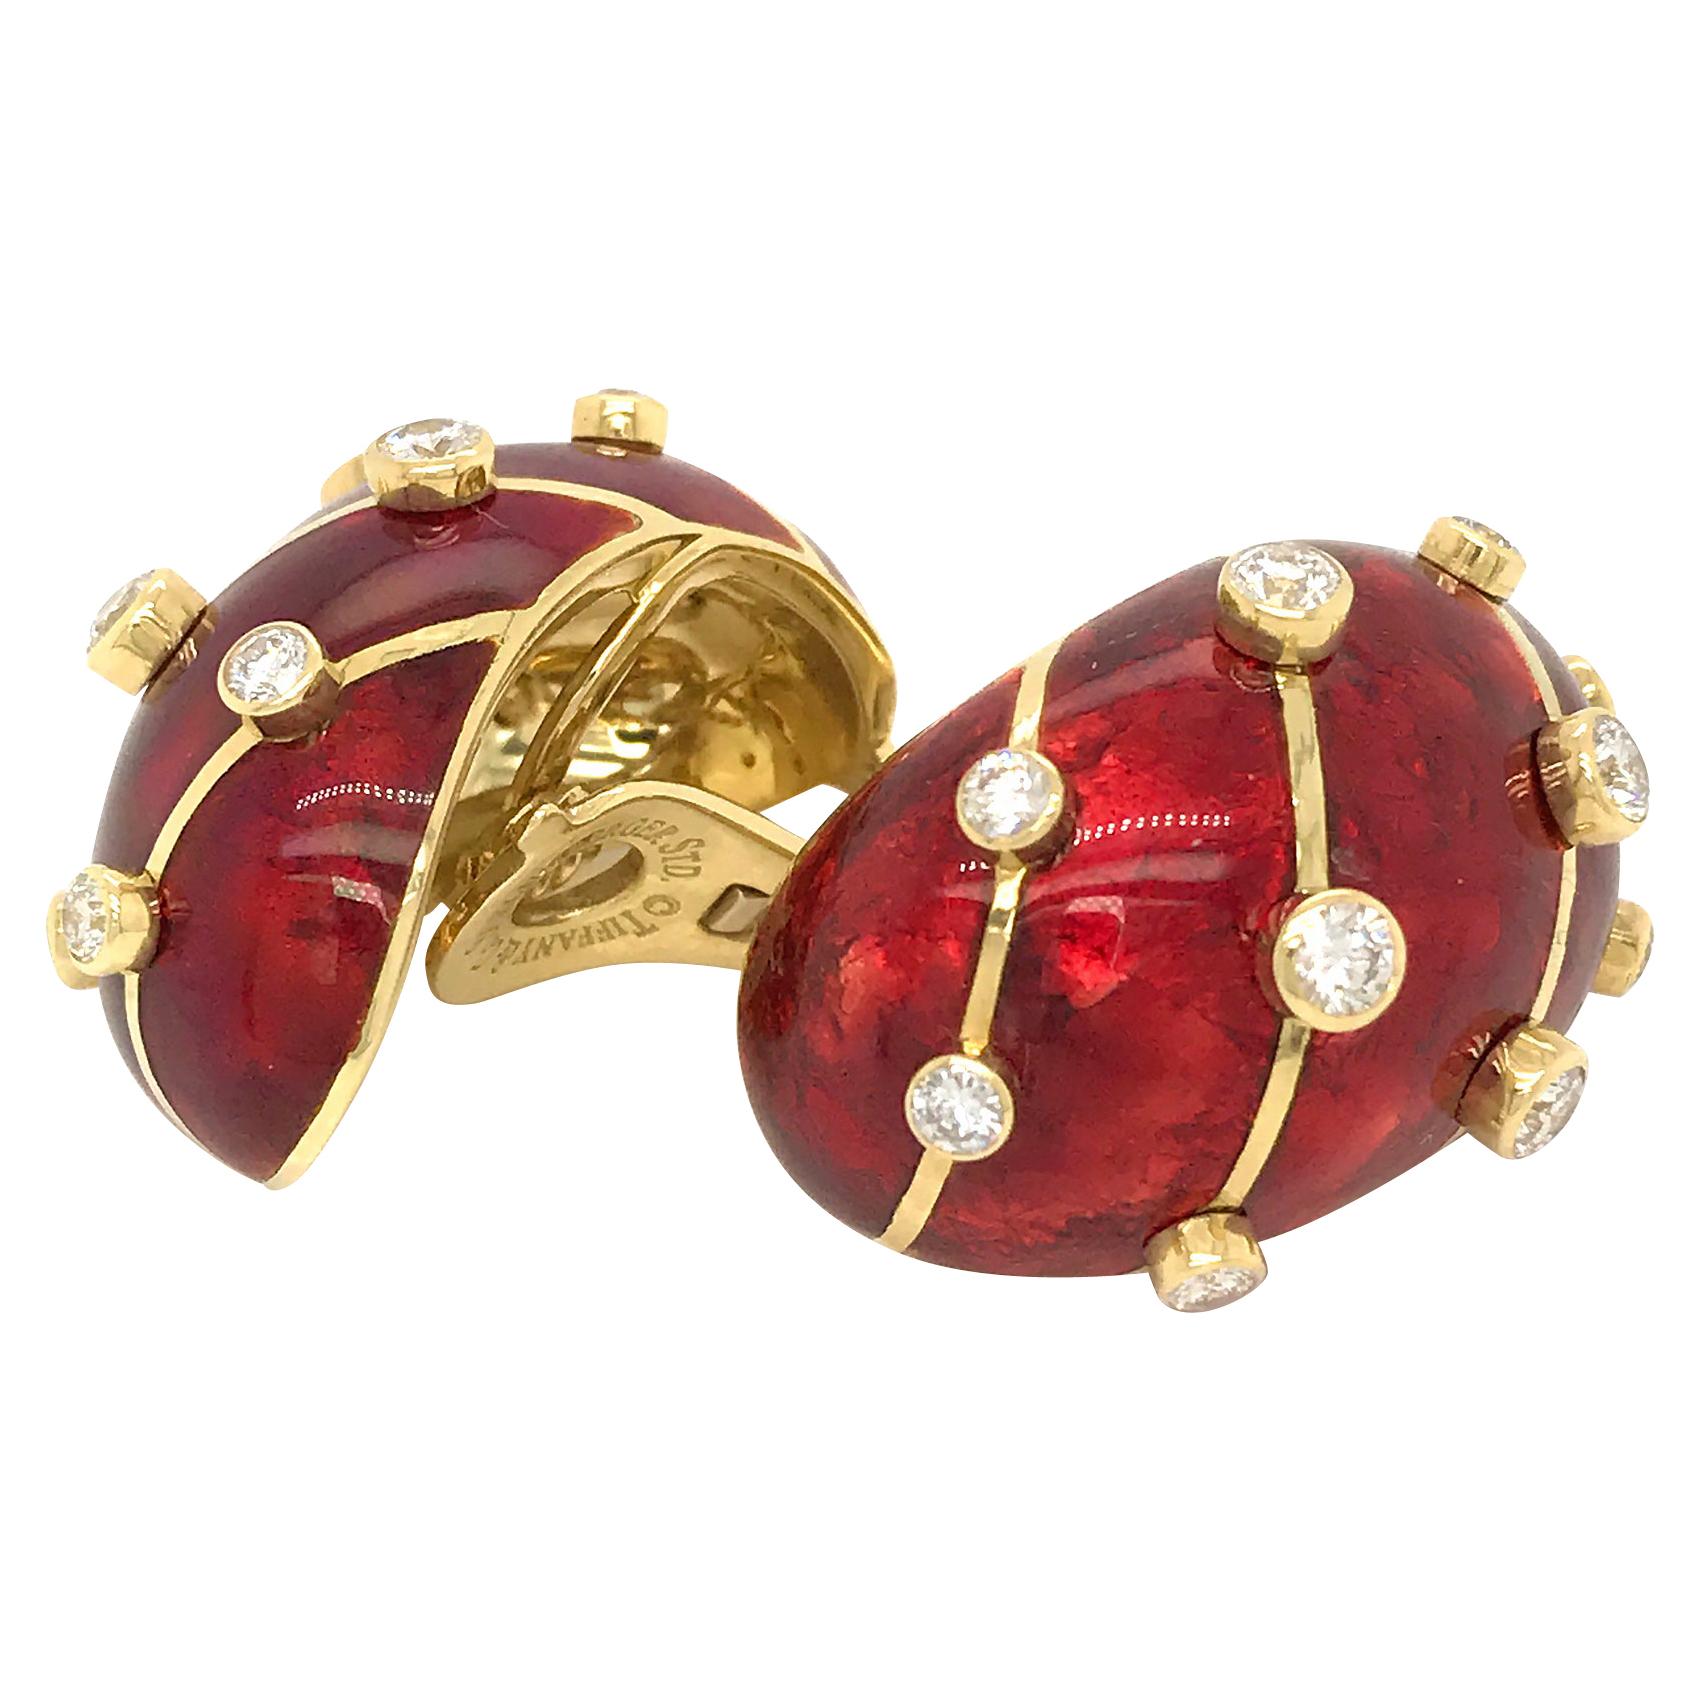 Tiffany & Co.
Red Enamel Diamond Banana Clip On 18k Yellow Gold Earrings

SCHLUMBERGER 18K GOLD RED ENAMEL DIAMOND EARRINGS

The Banana earrings represent an iconic Schlumberger design, crafted out of 18K yellow gold, with red enamel applied between